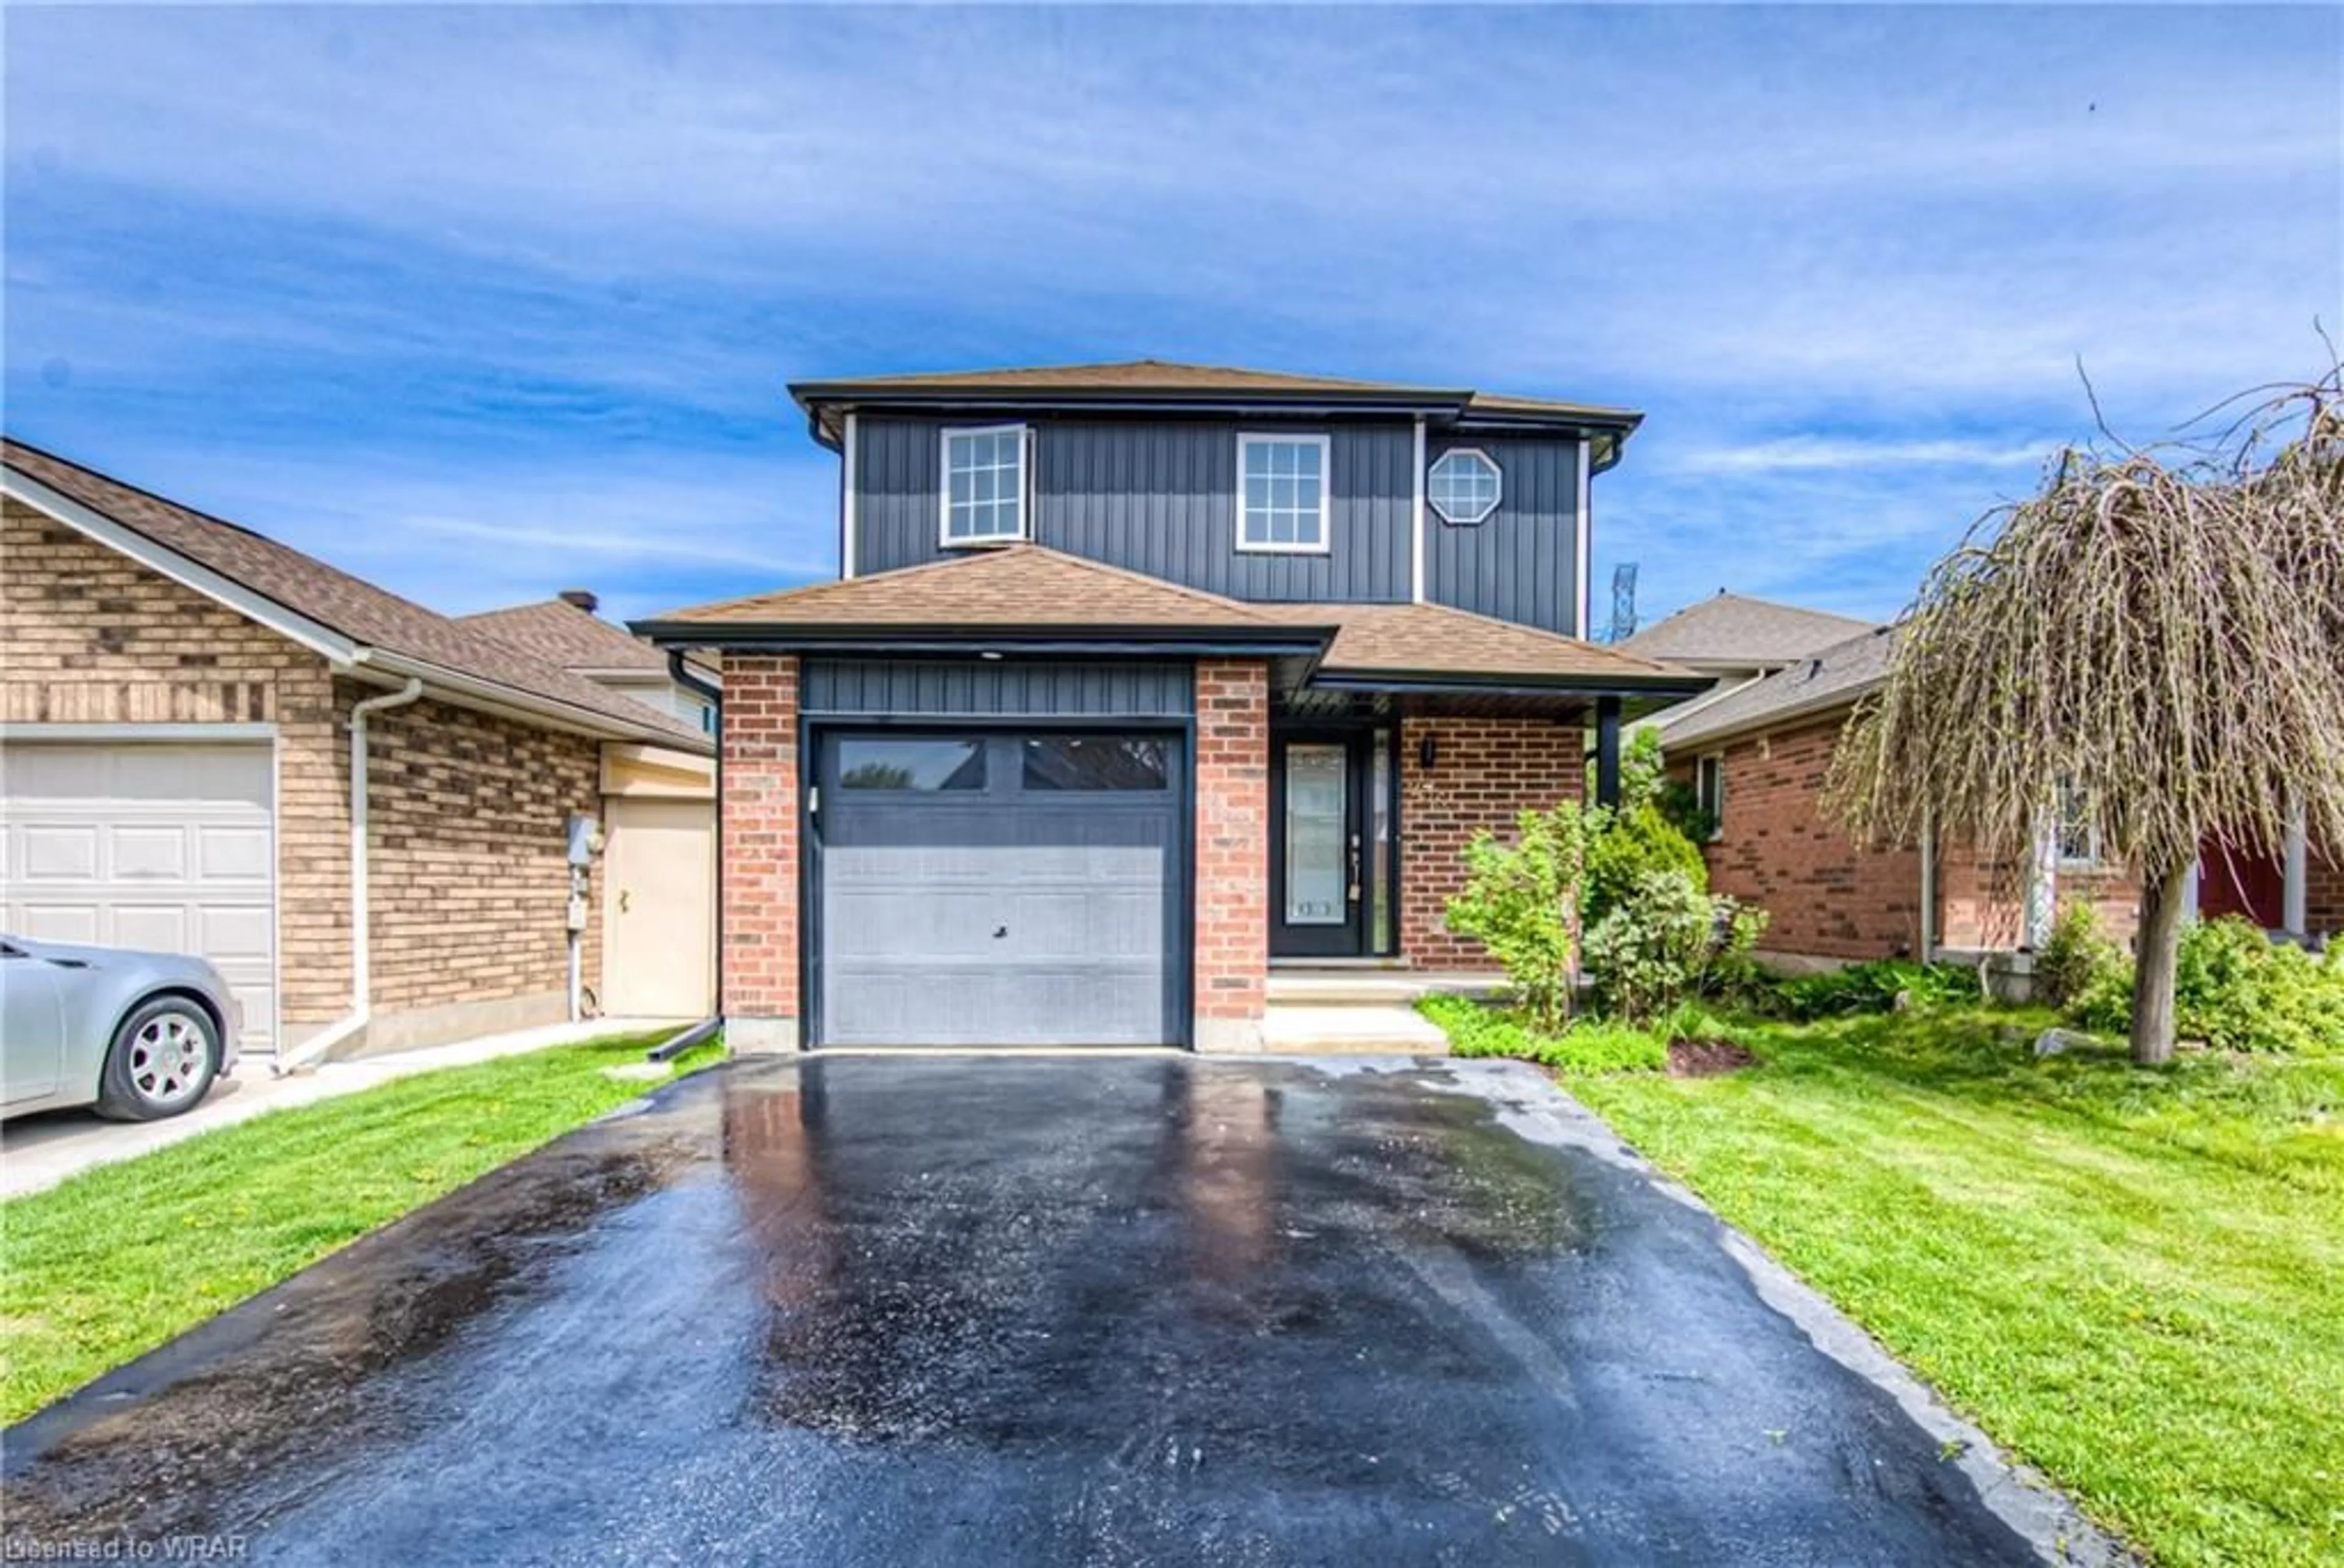 Home with brick exterior material for 236 Grey Fox Dr, Kitchener Ontario N2E 3N4